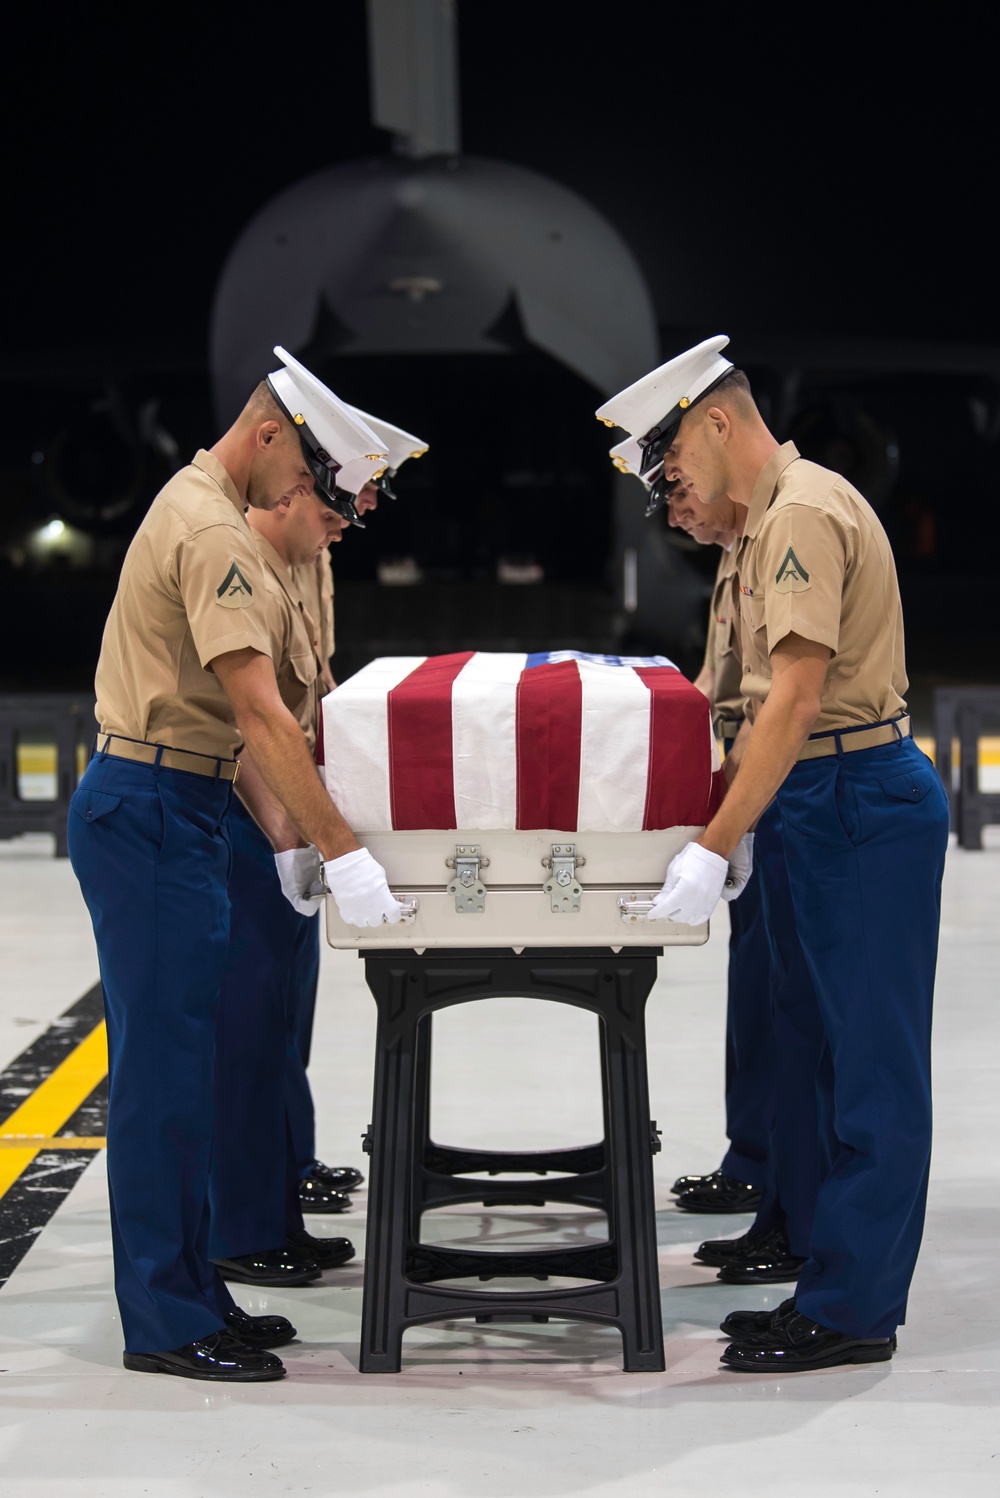 DPAA and MARFORPAC Conduct Honorable Carry for Remains Returned from the Battle of Tarawa